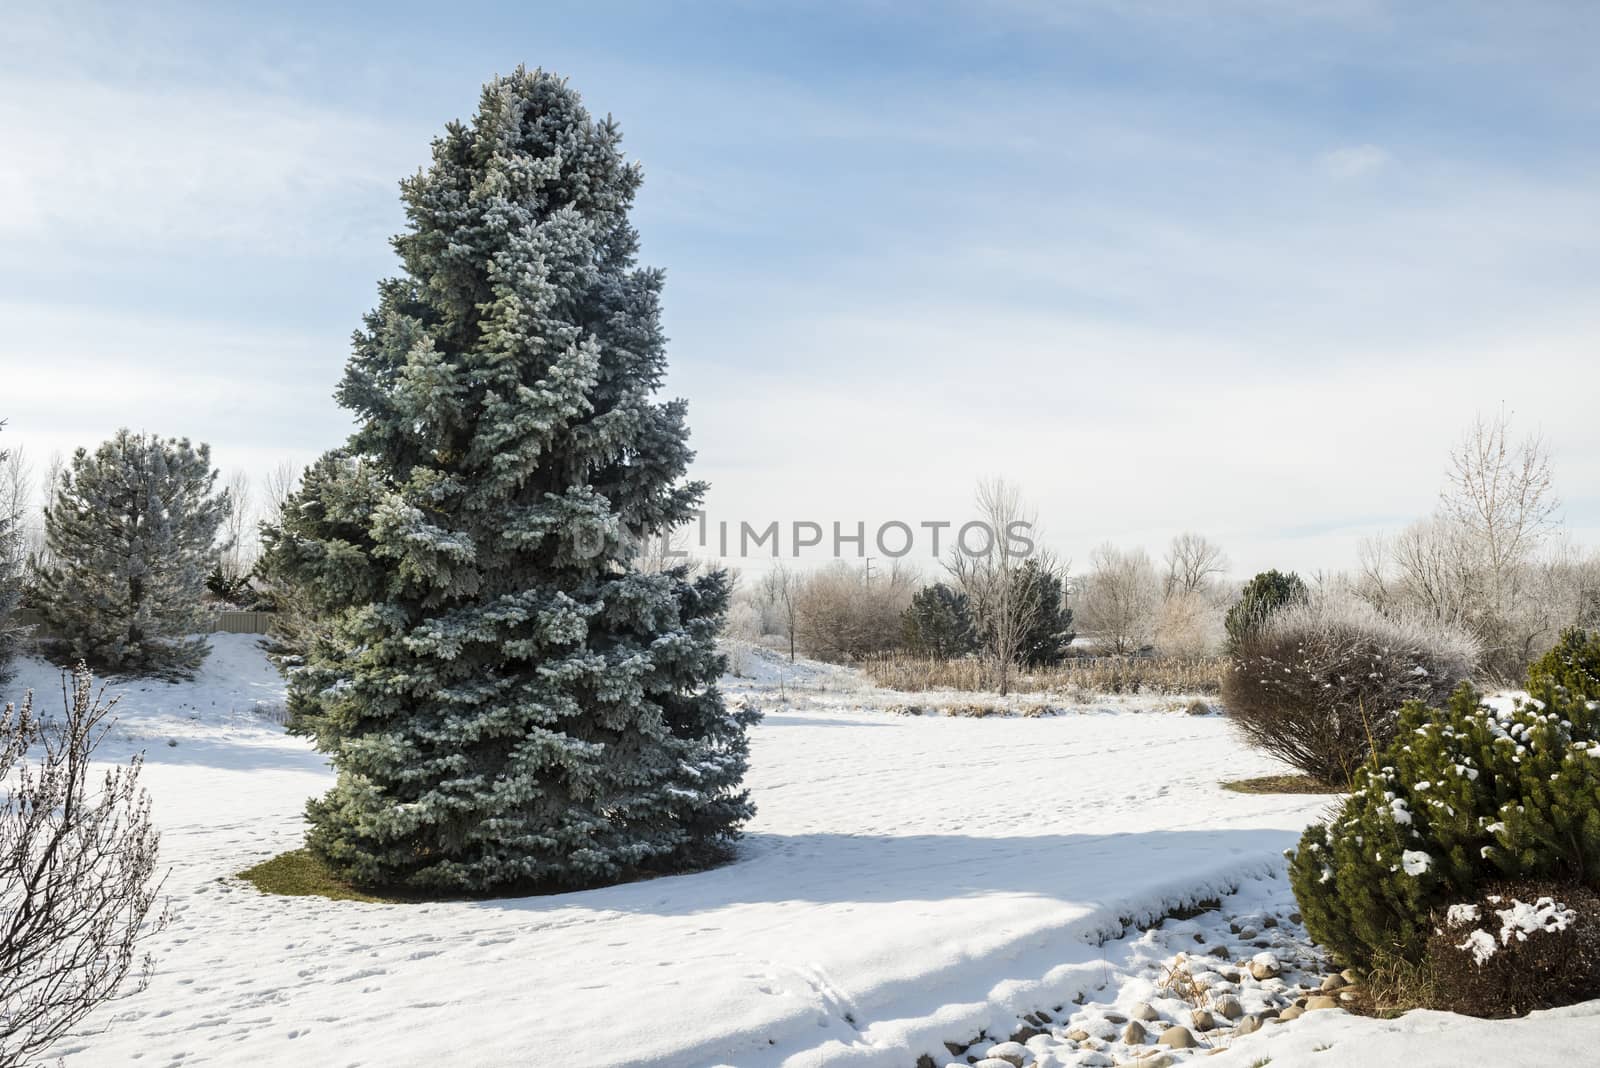 Large snow-covered pine tree in winter